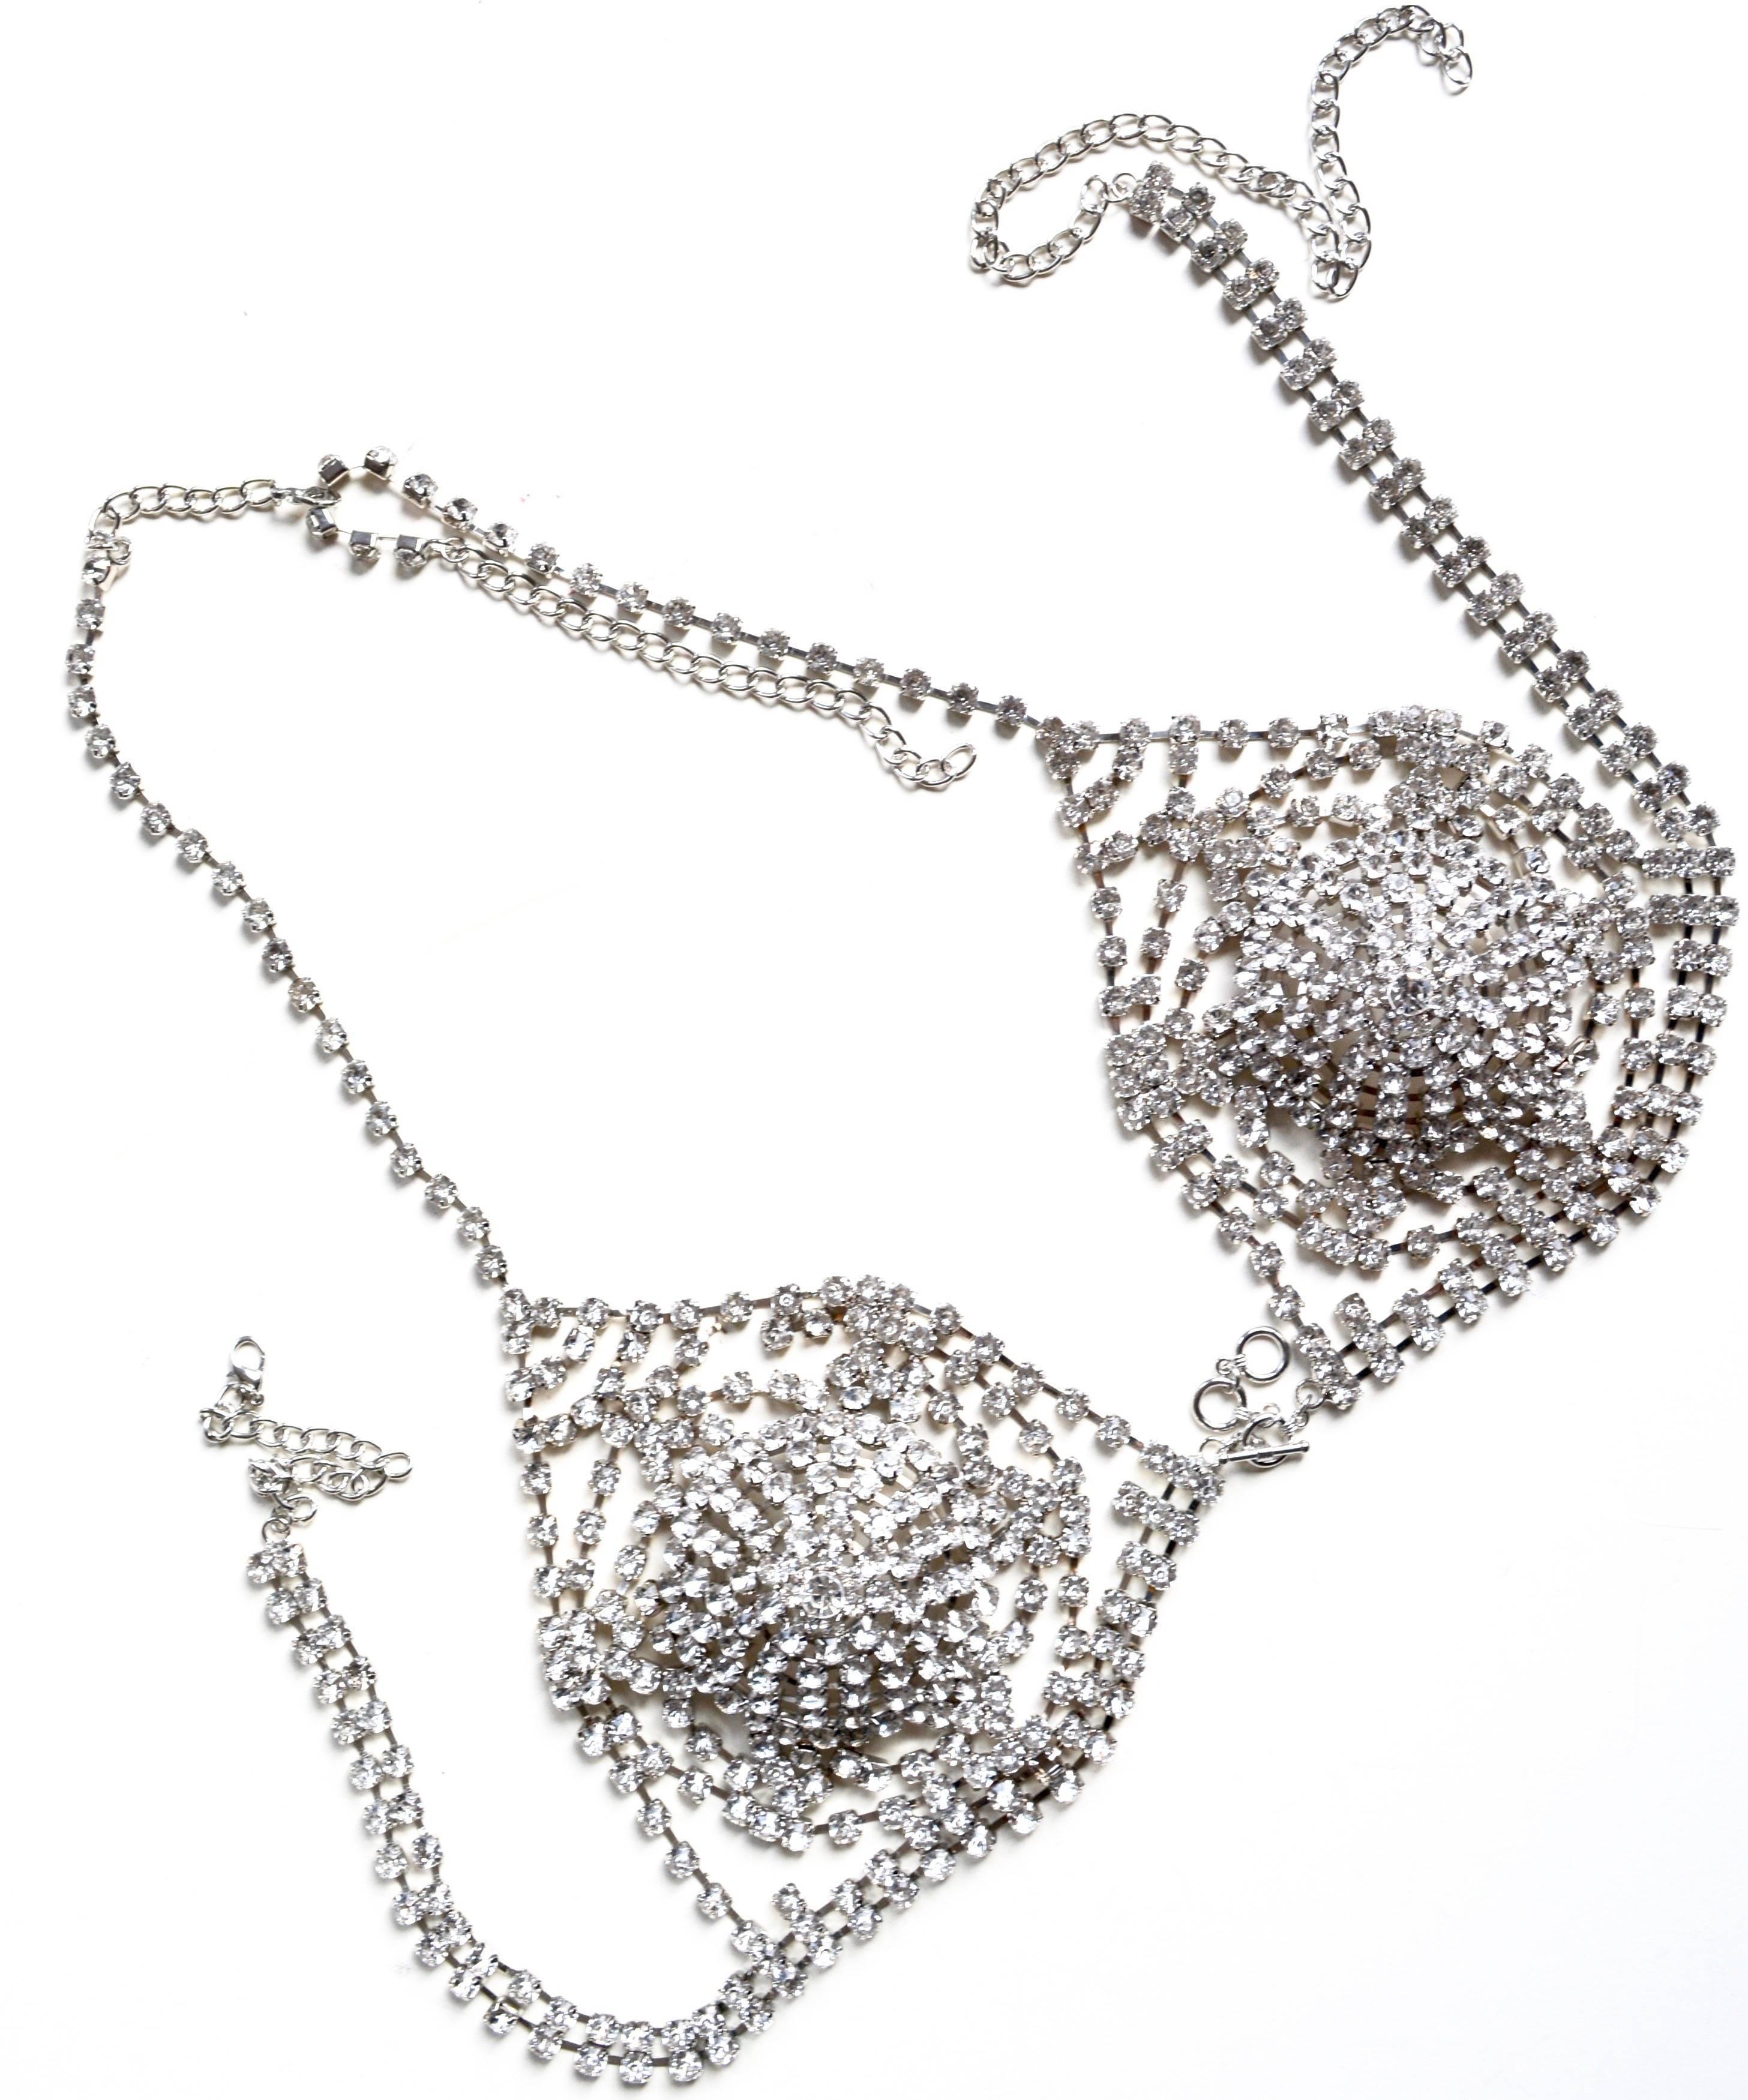 Rhinestone bra made in the 1990s with adjustable aspects to fit various sizes, but the cups measure about 5